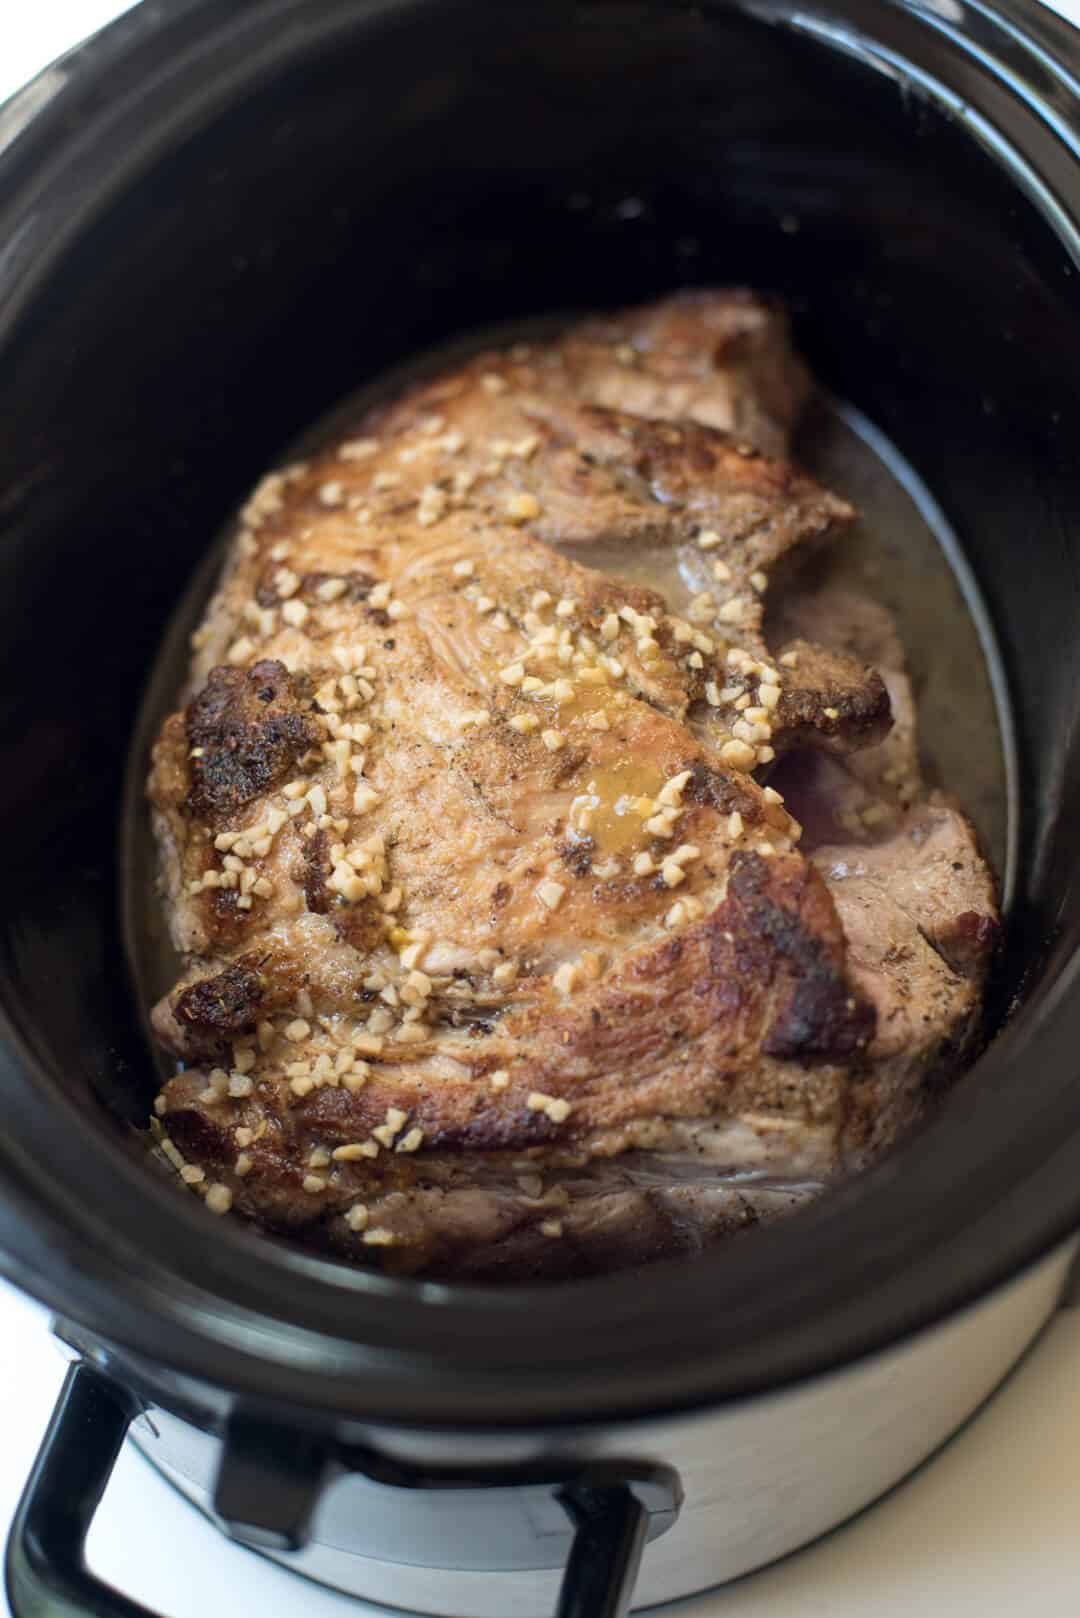 The browned roast in a slow cooker.